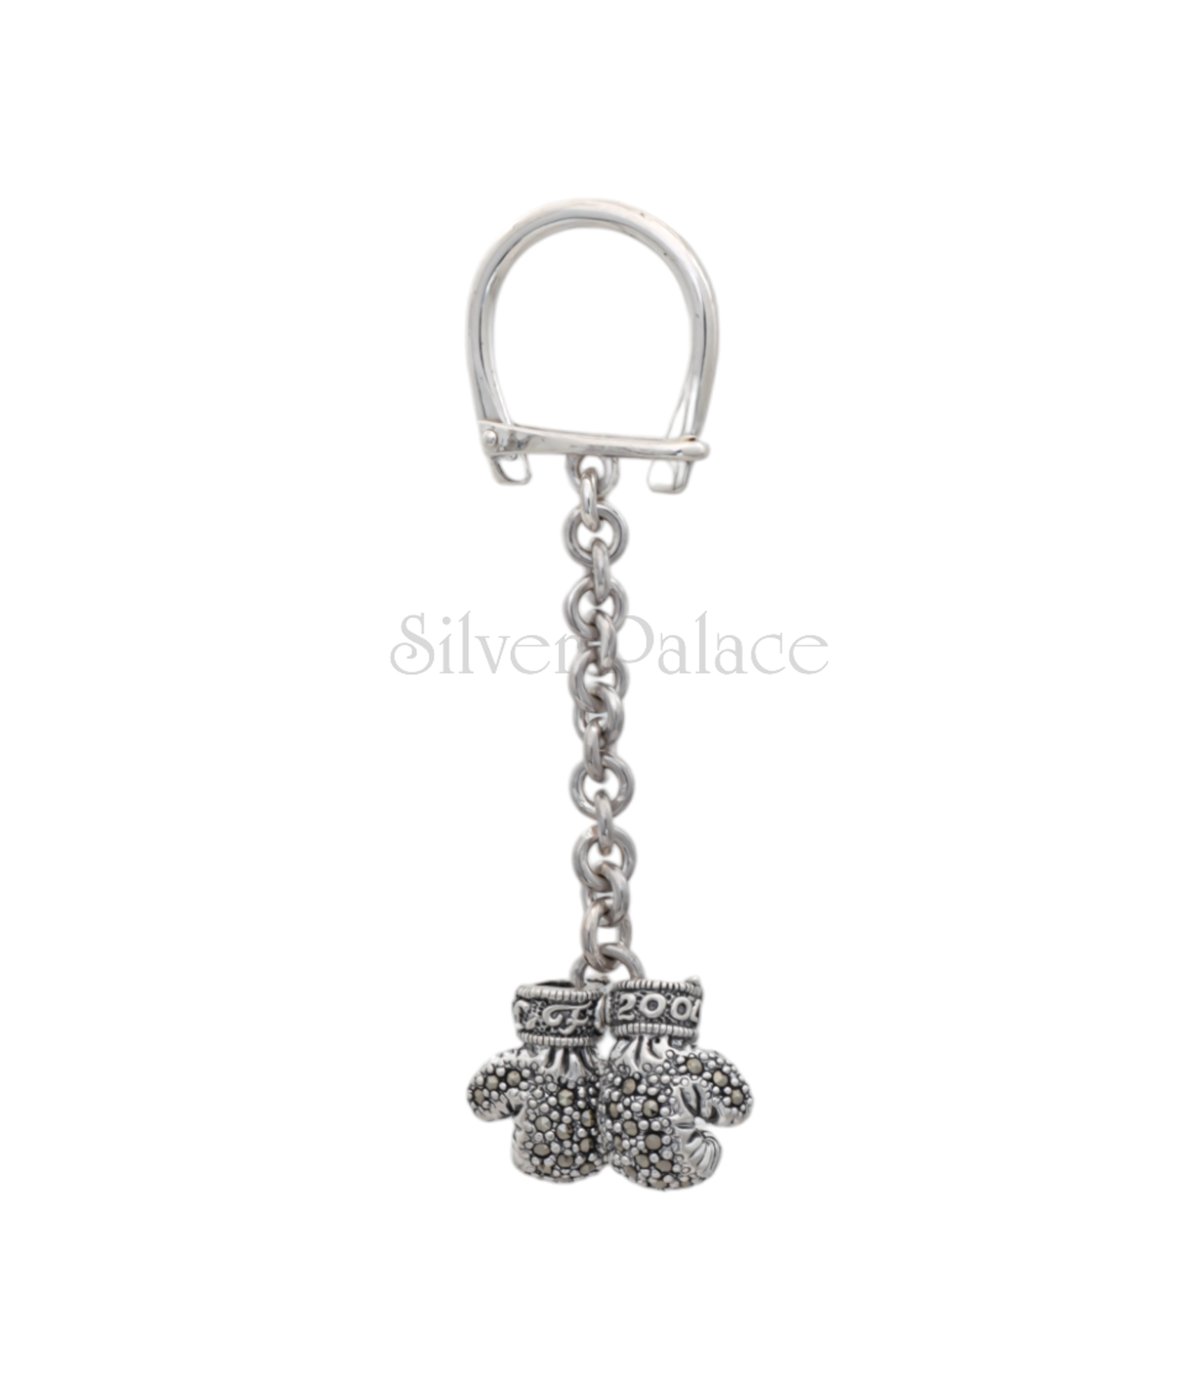 92.5 PURE SILVER BOXING GLOVES  KEYCHAIN FOR SPORT LOVERS